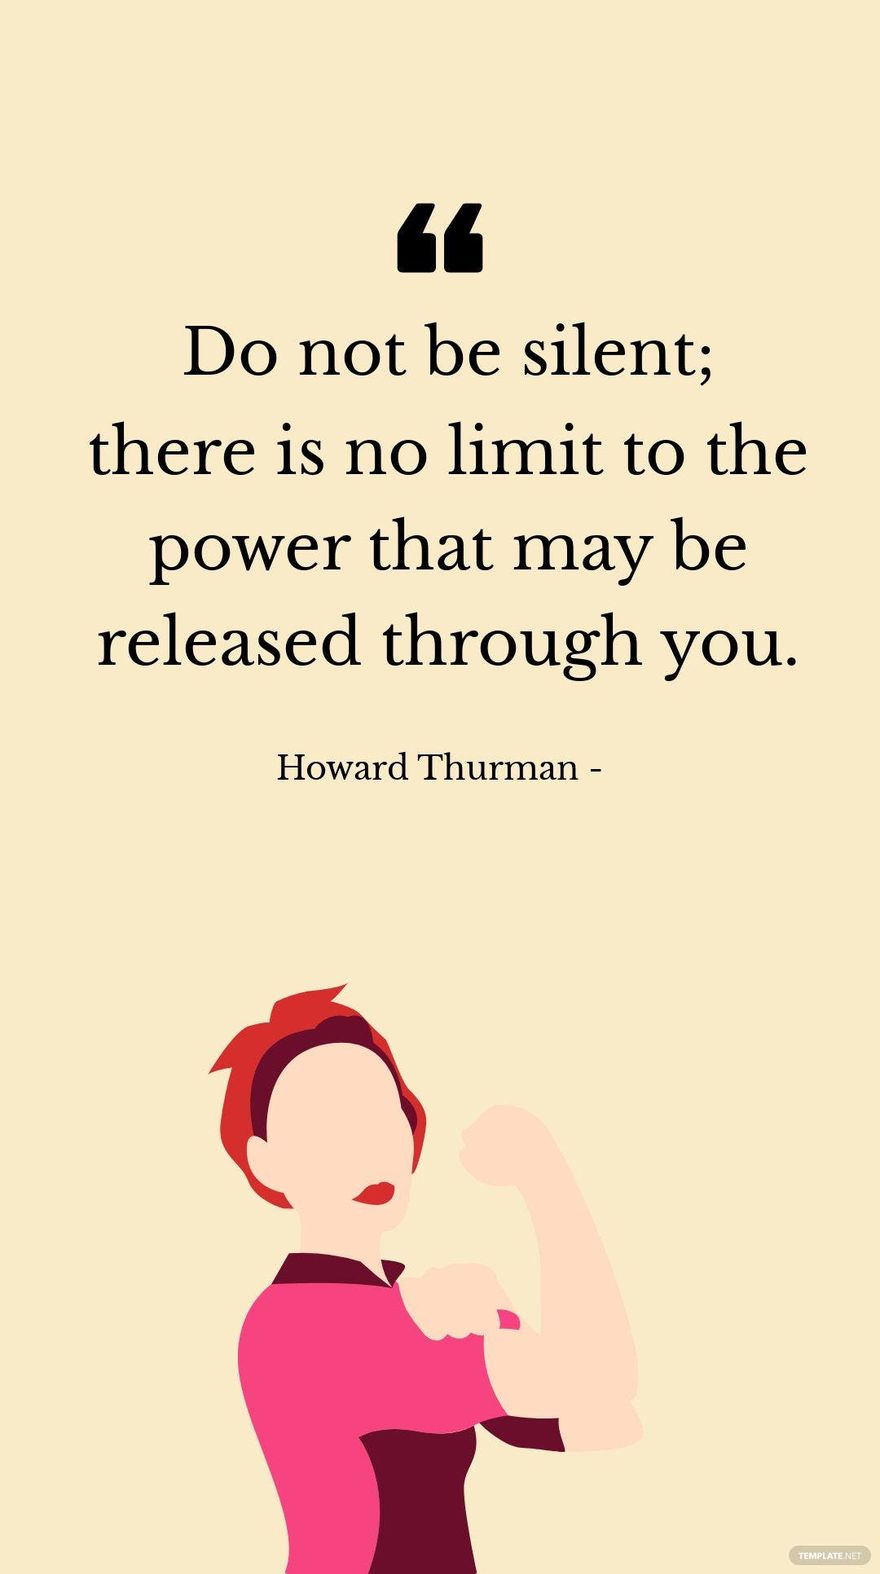 Free Howard Thurman - Do not be silent; there is no limit to the power that may be released through you.